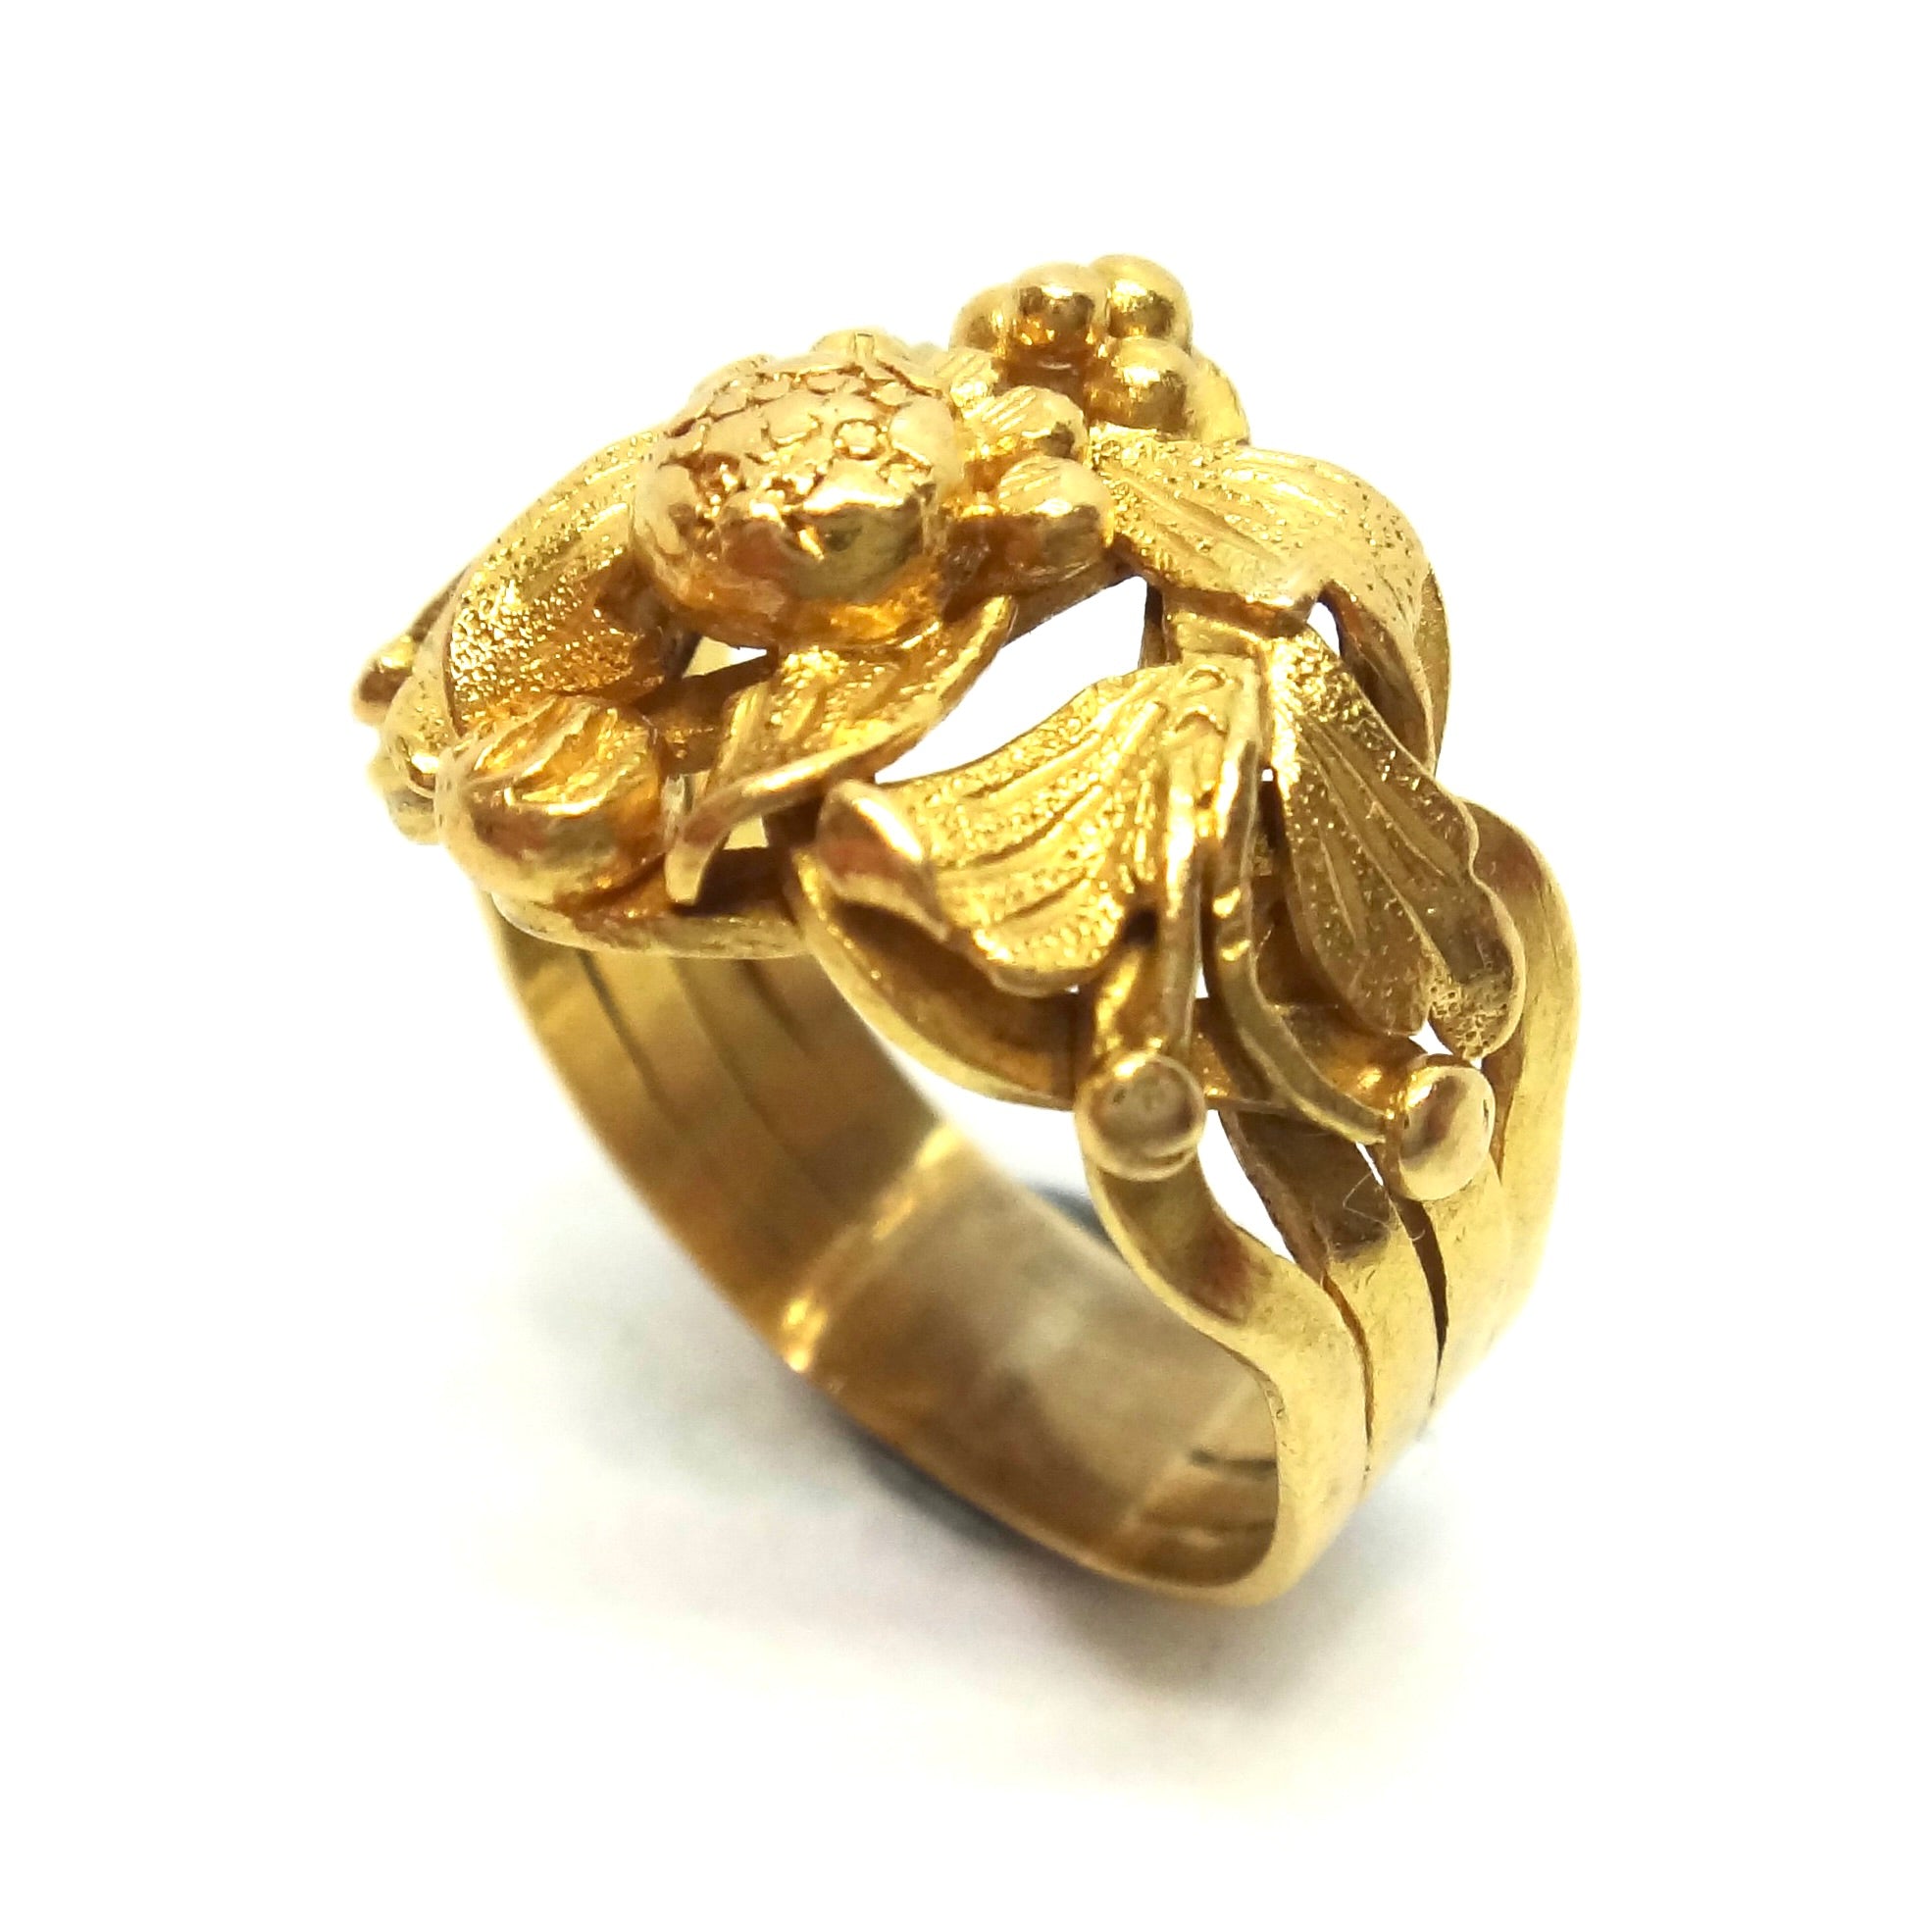 ANTIQUE 18ct Yellow GOLD Floral Design Ring c.1870